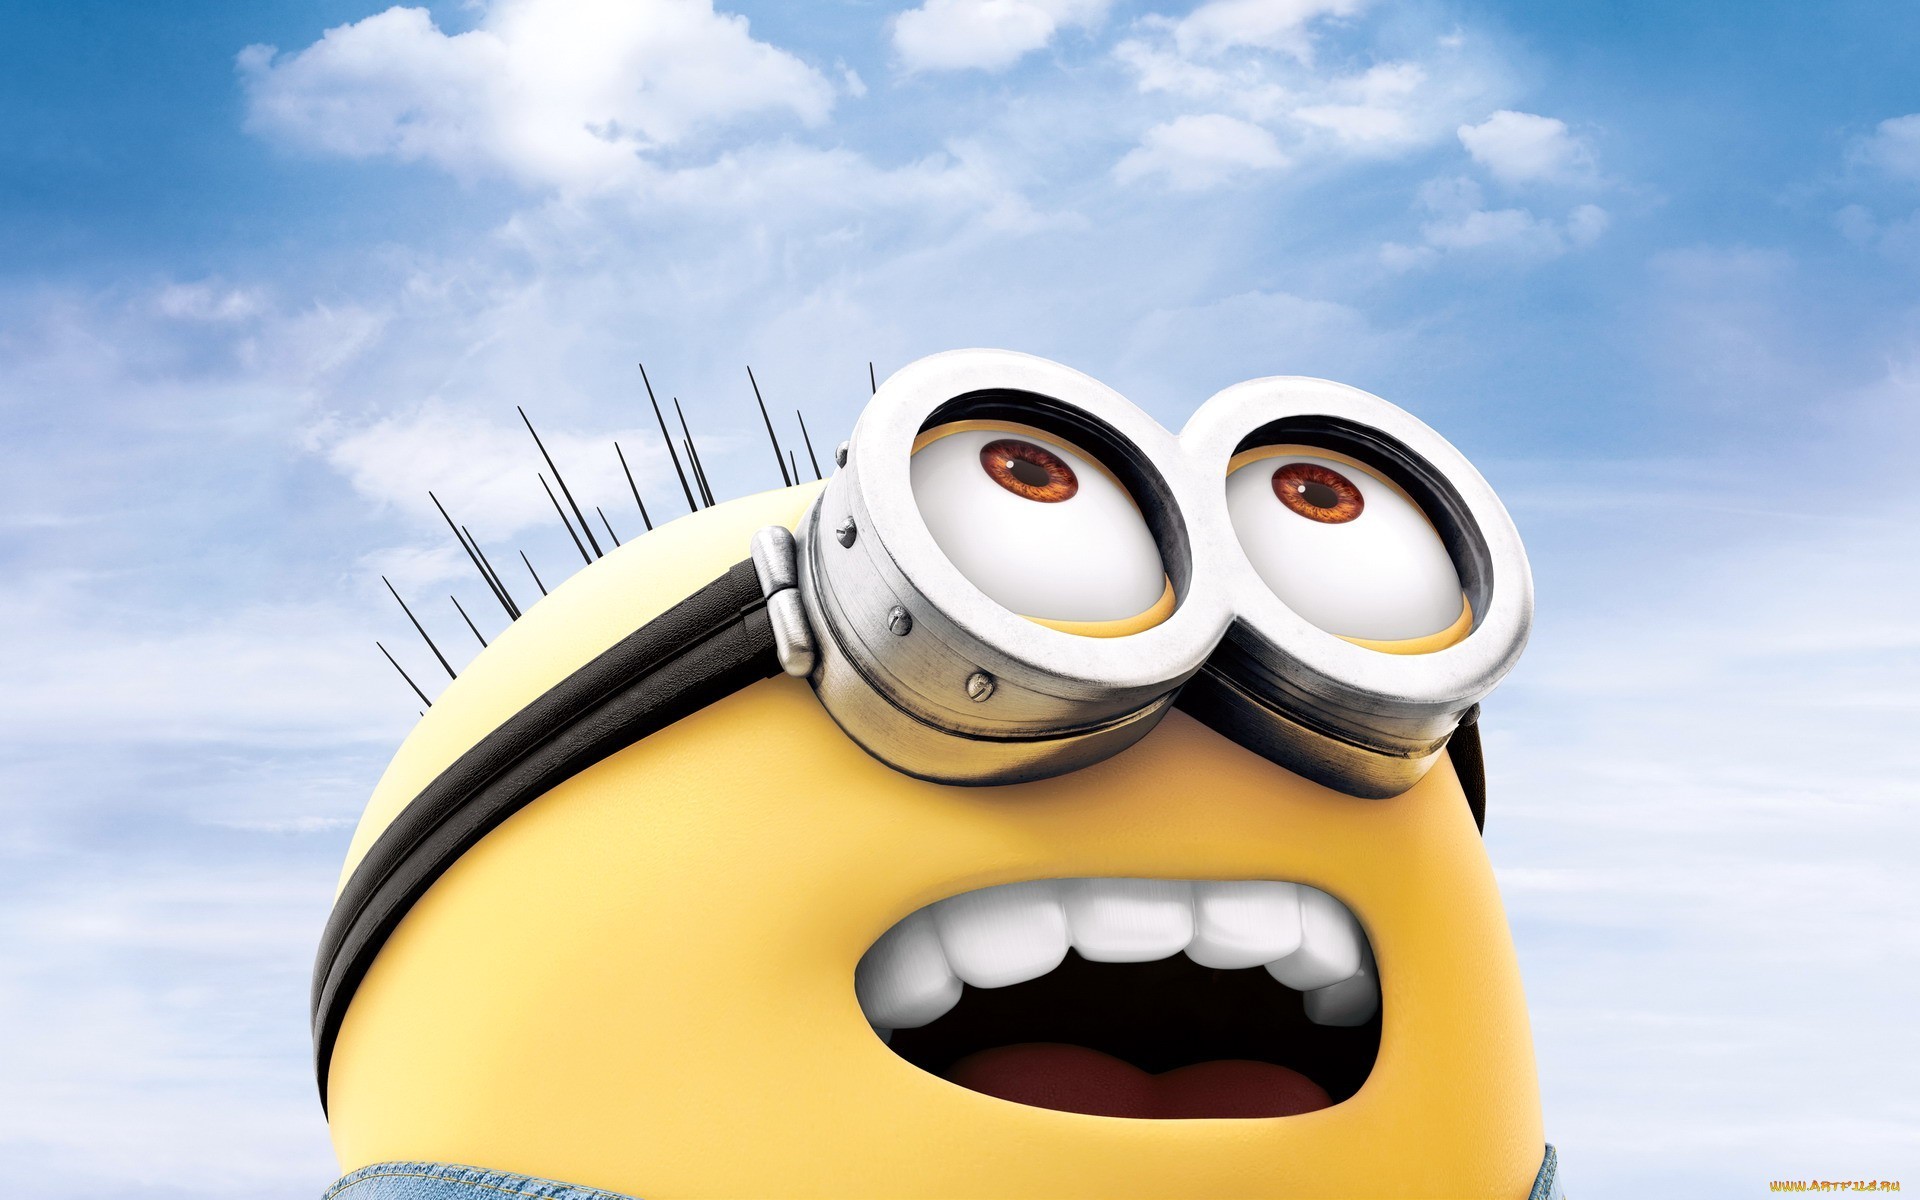 Despicable me 2 Movie Cute wallpapers (6)